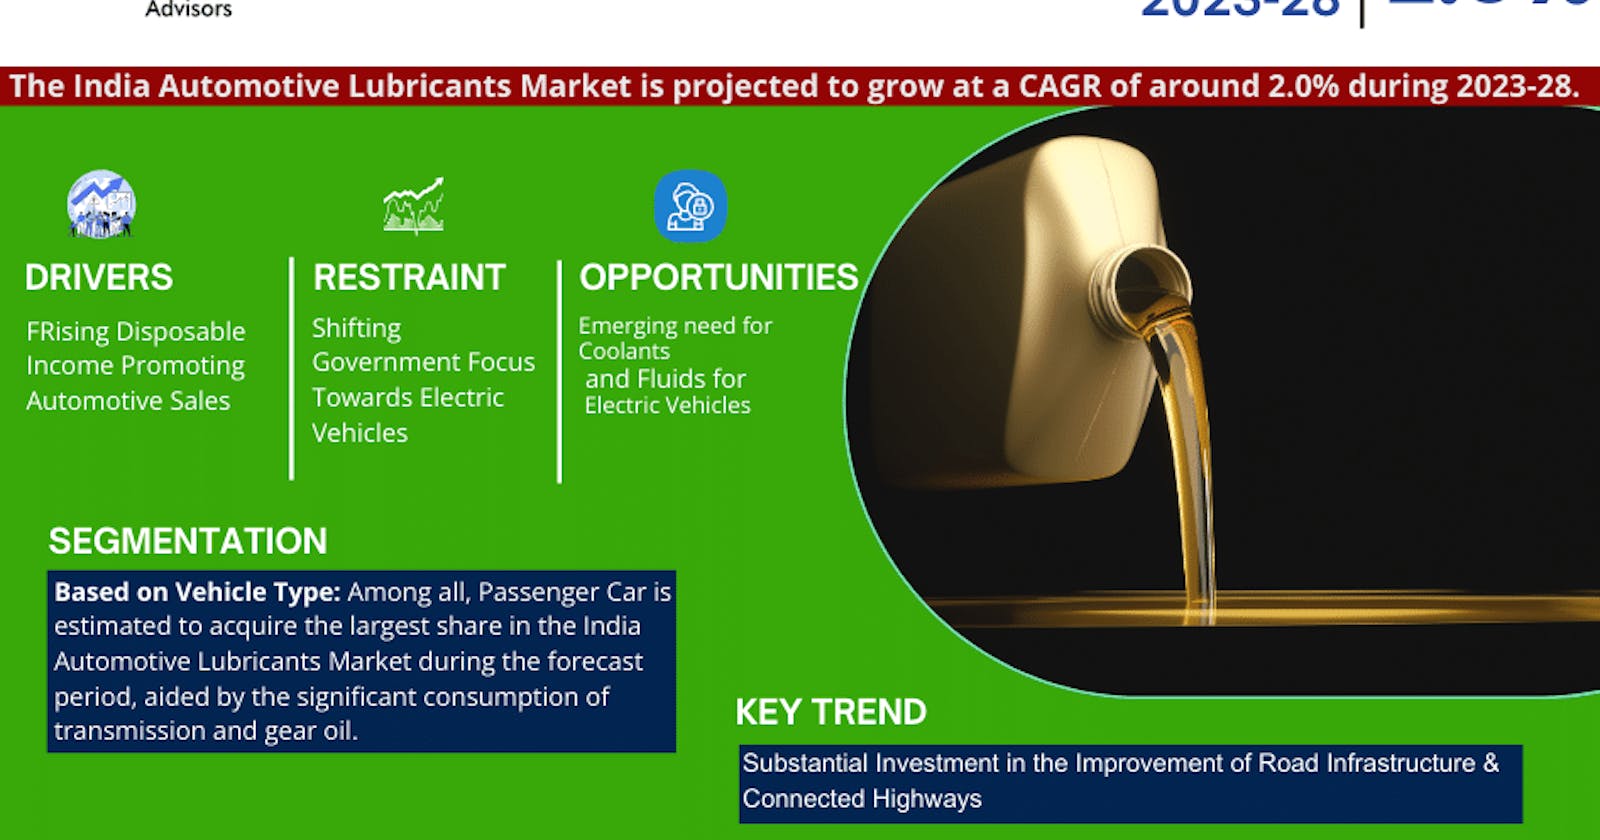 India Automotive Lubricants Market Forecasts 2.0% CAGR Growth Through 2028